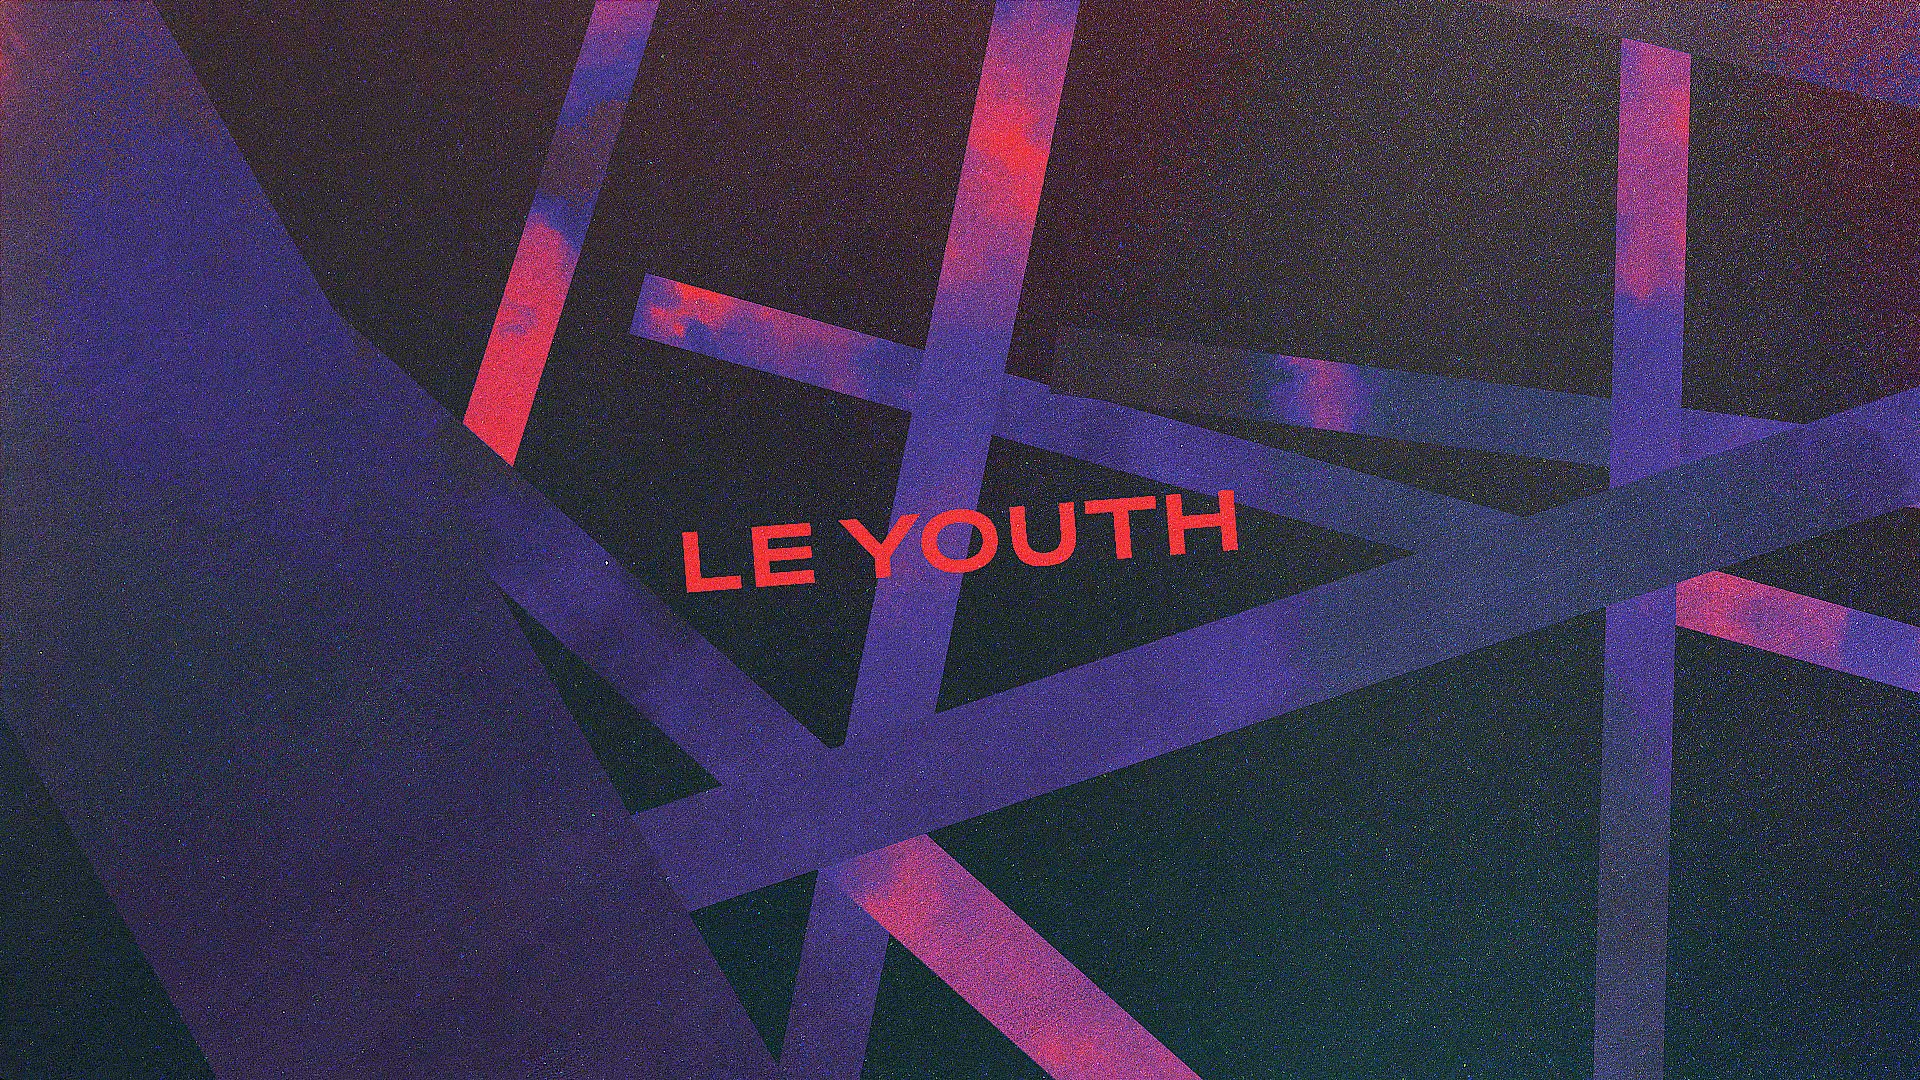 Le-youth-Tour-Visuals-Article_T1-1-Le-Youth-Tour-Visual_2023-07-03_21.15.05